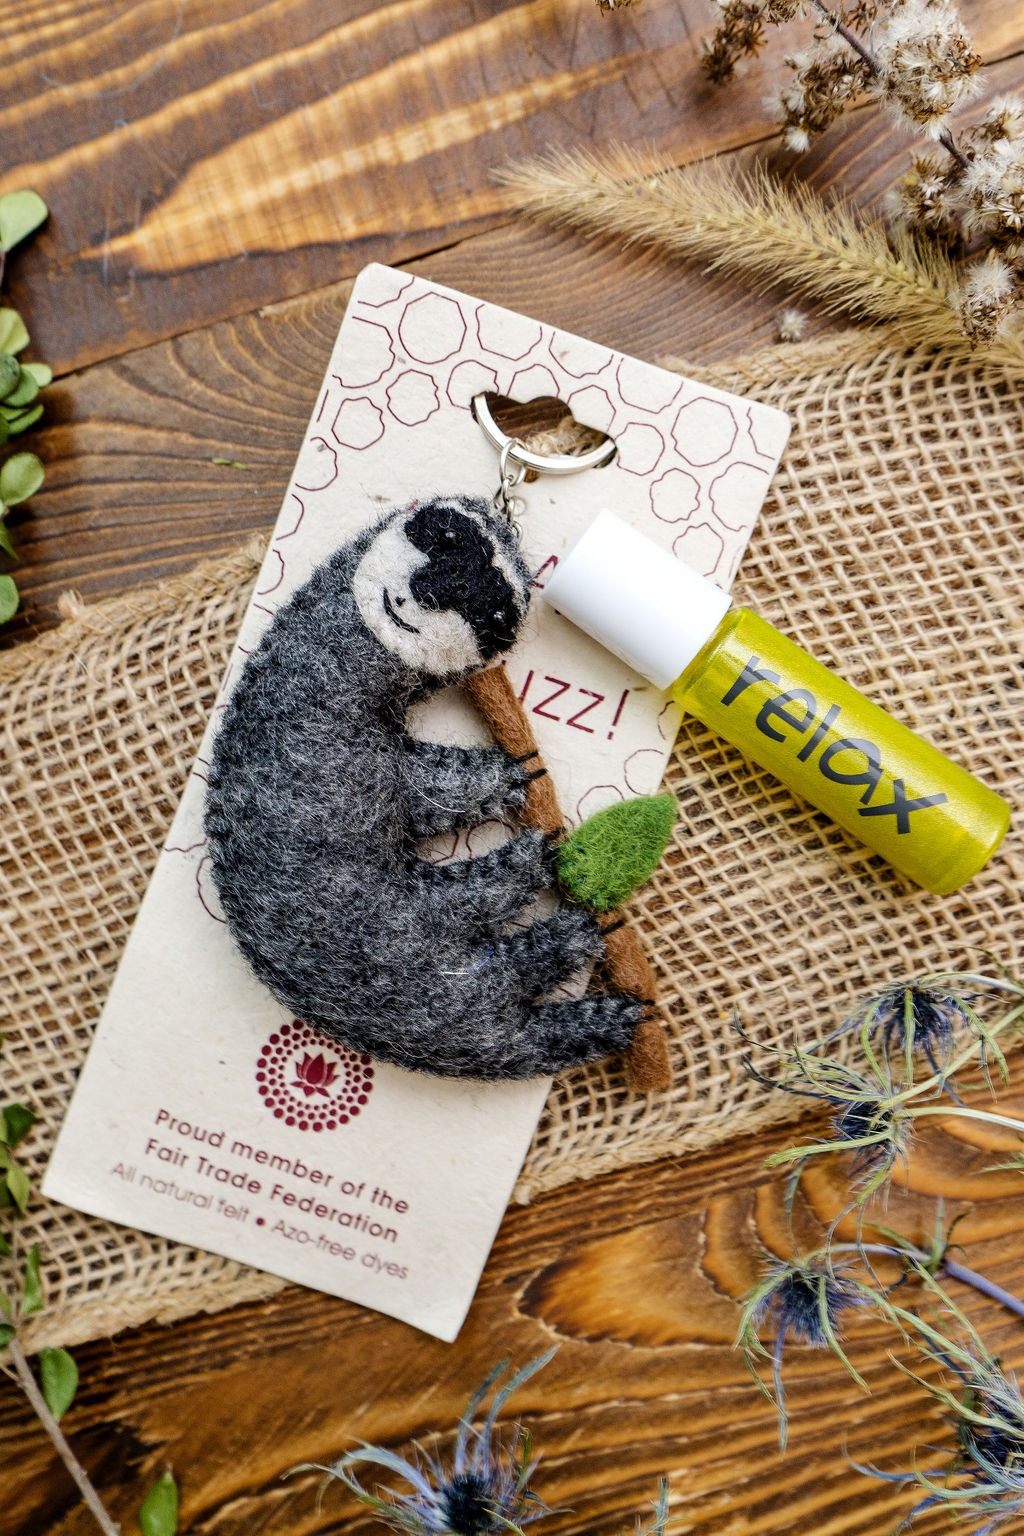 Wool diffuser keychain with roller bottle, fair trade by a women's coop in Nepal